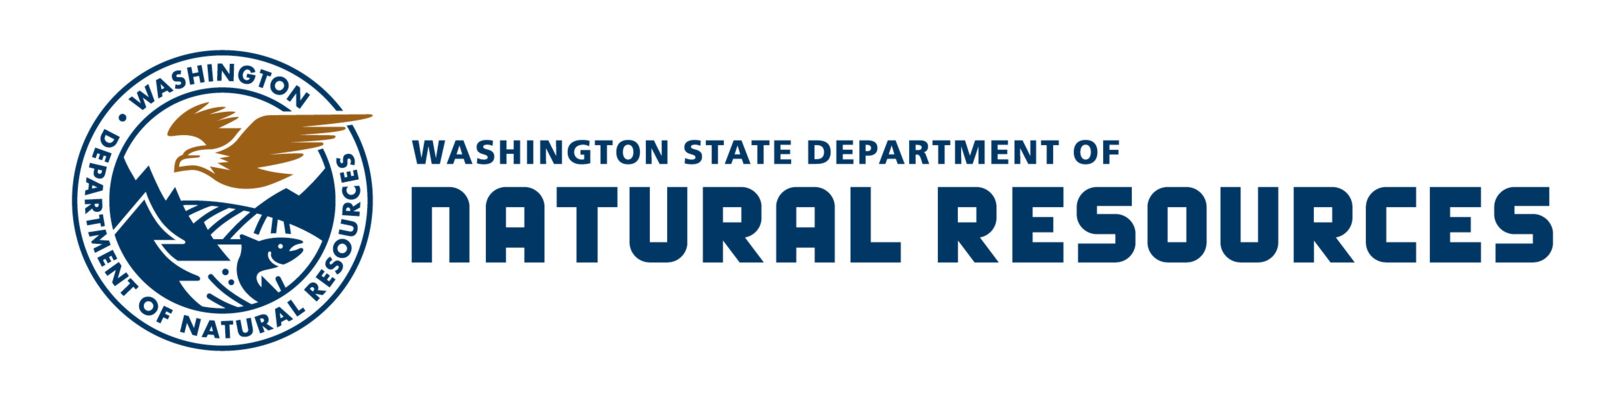 Washington Dept. of Natural Resources Seeks Urban Forest Inventory Technician